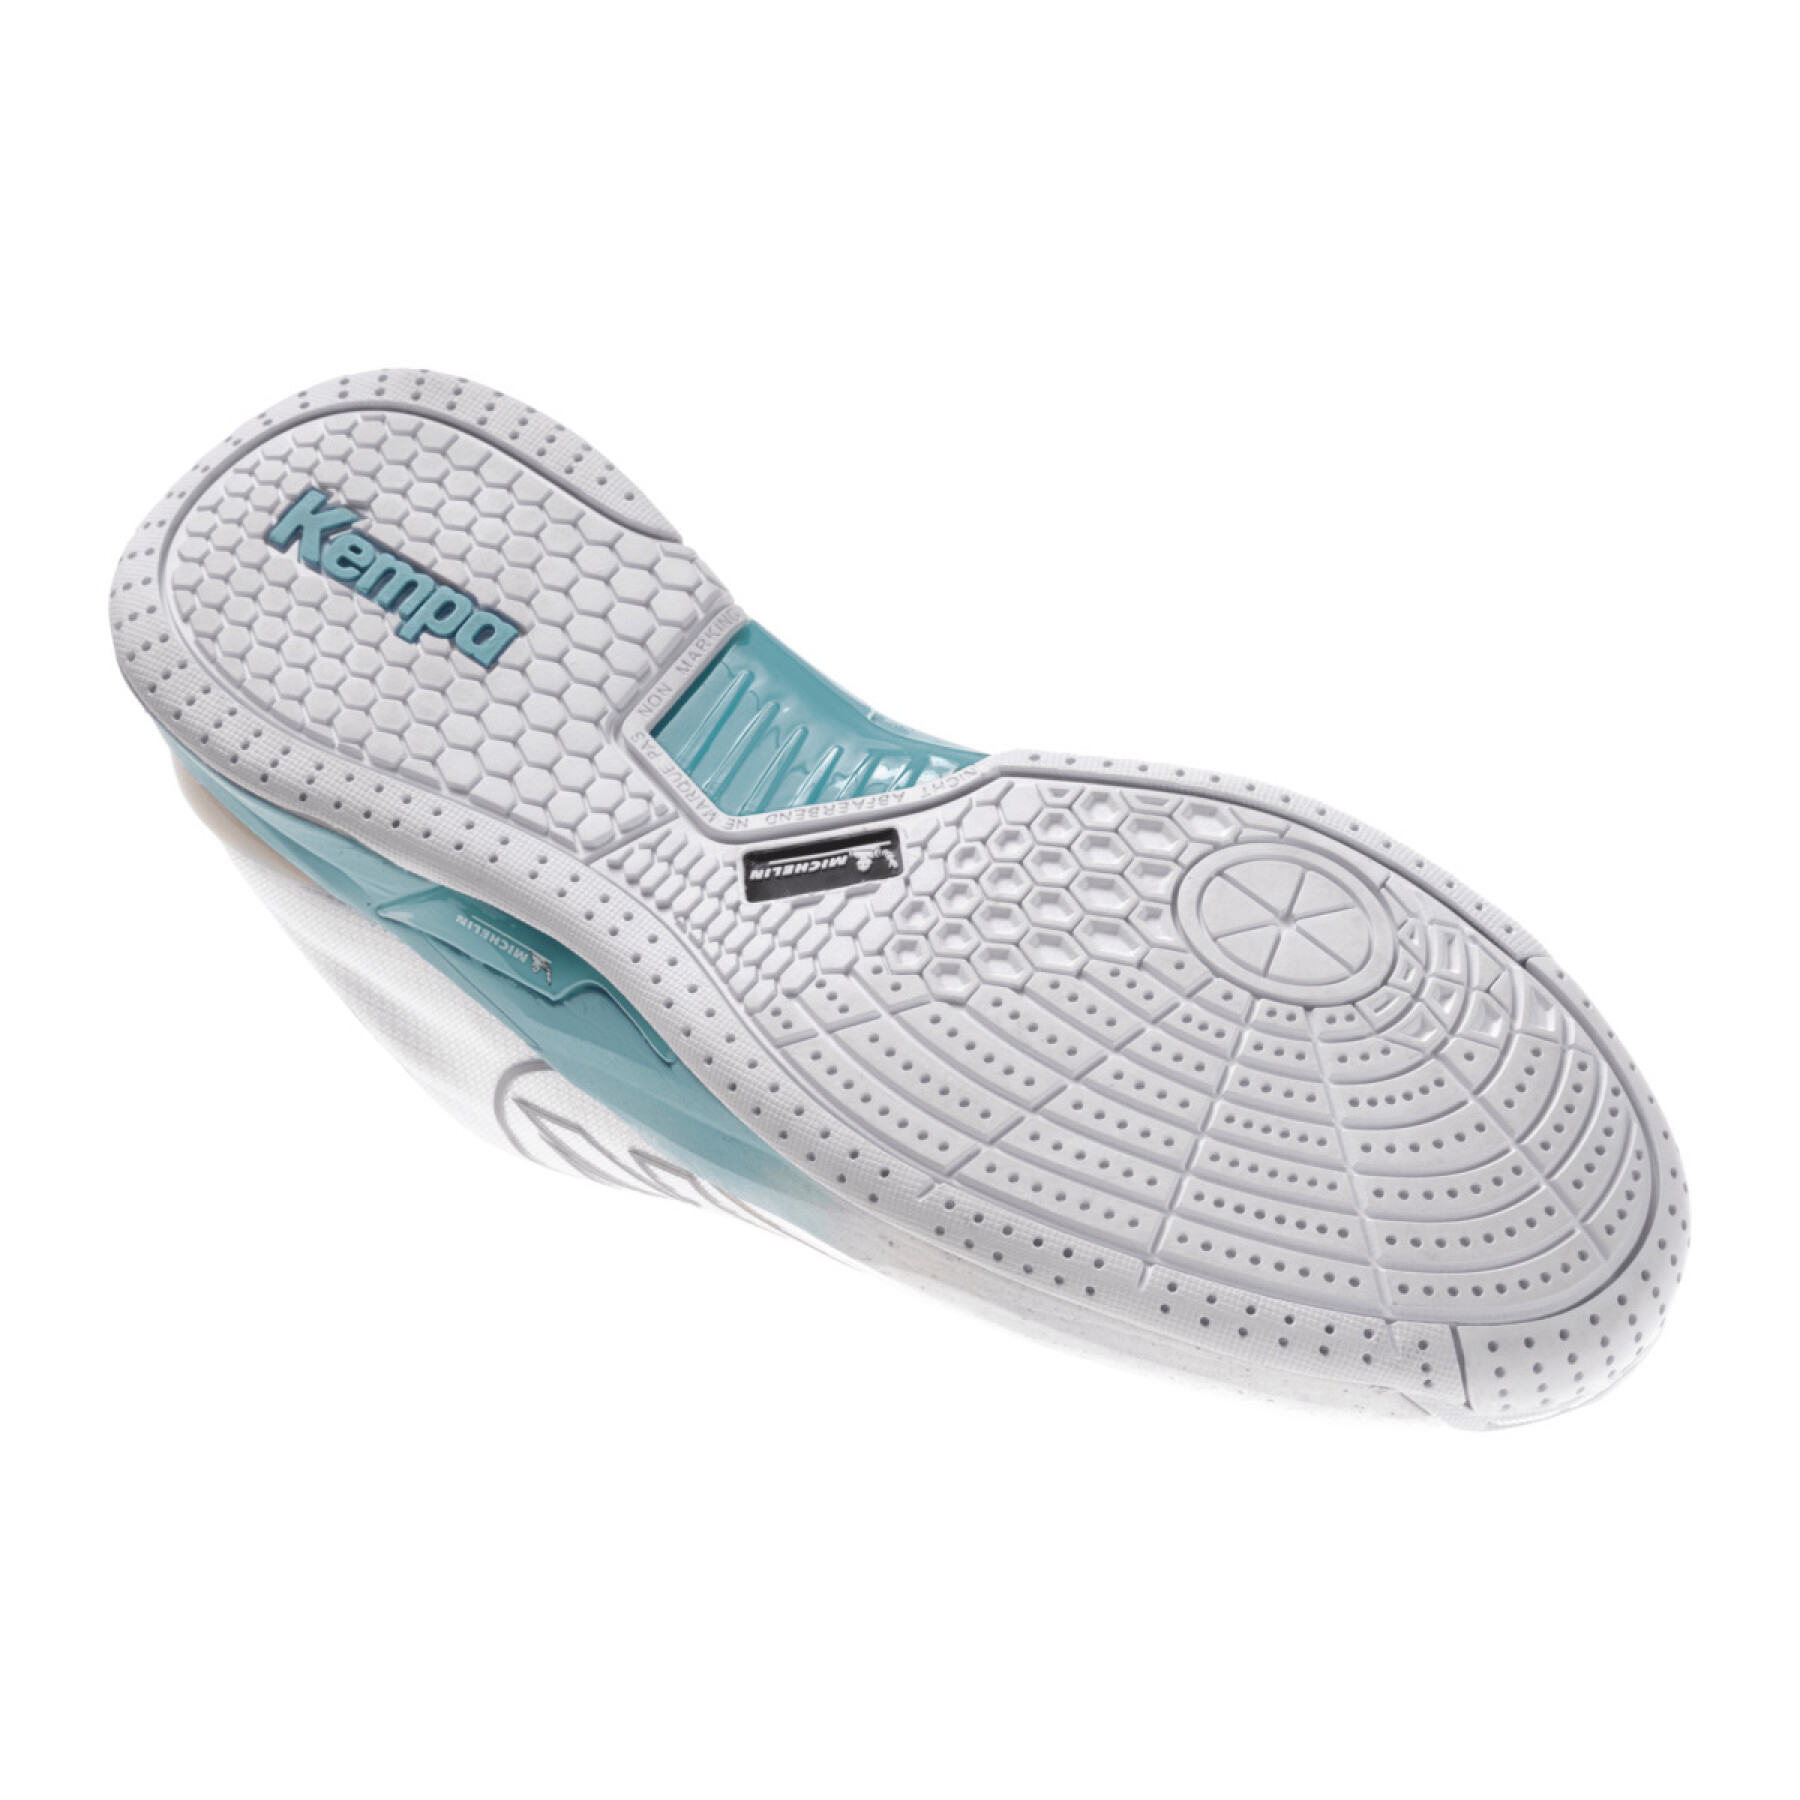 Chaussures indoor femme Kempa Attack Pro 2.0 Game Changer